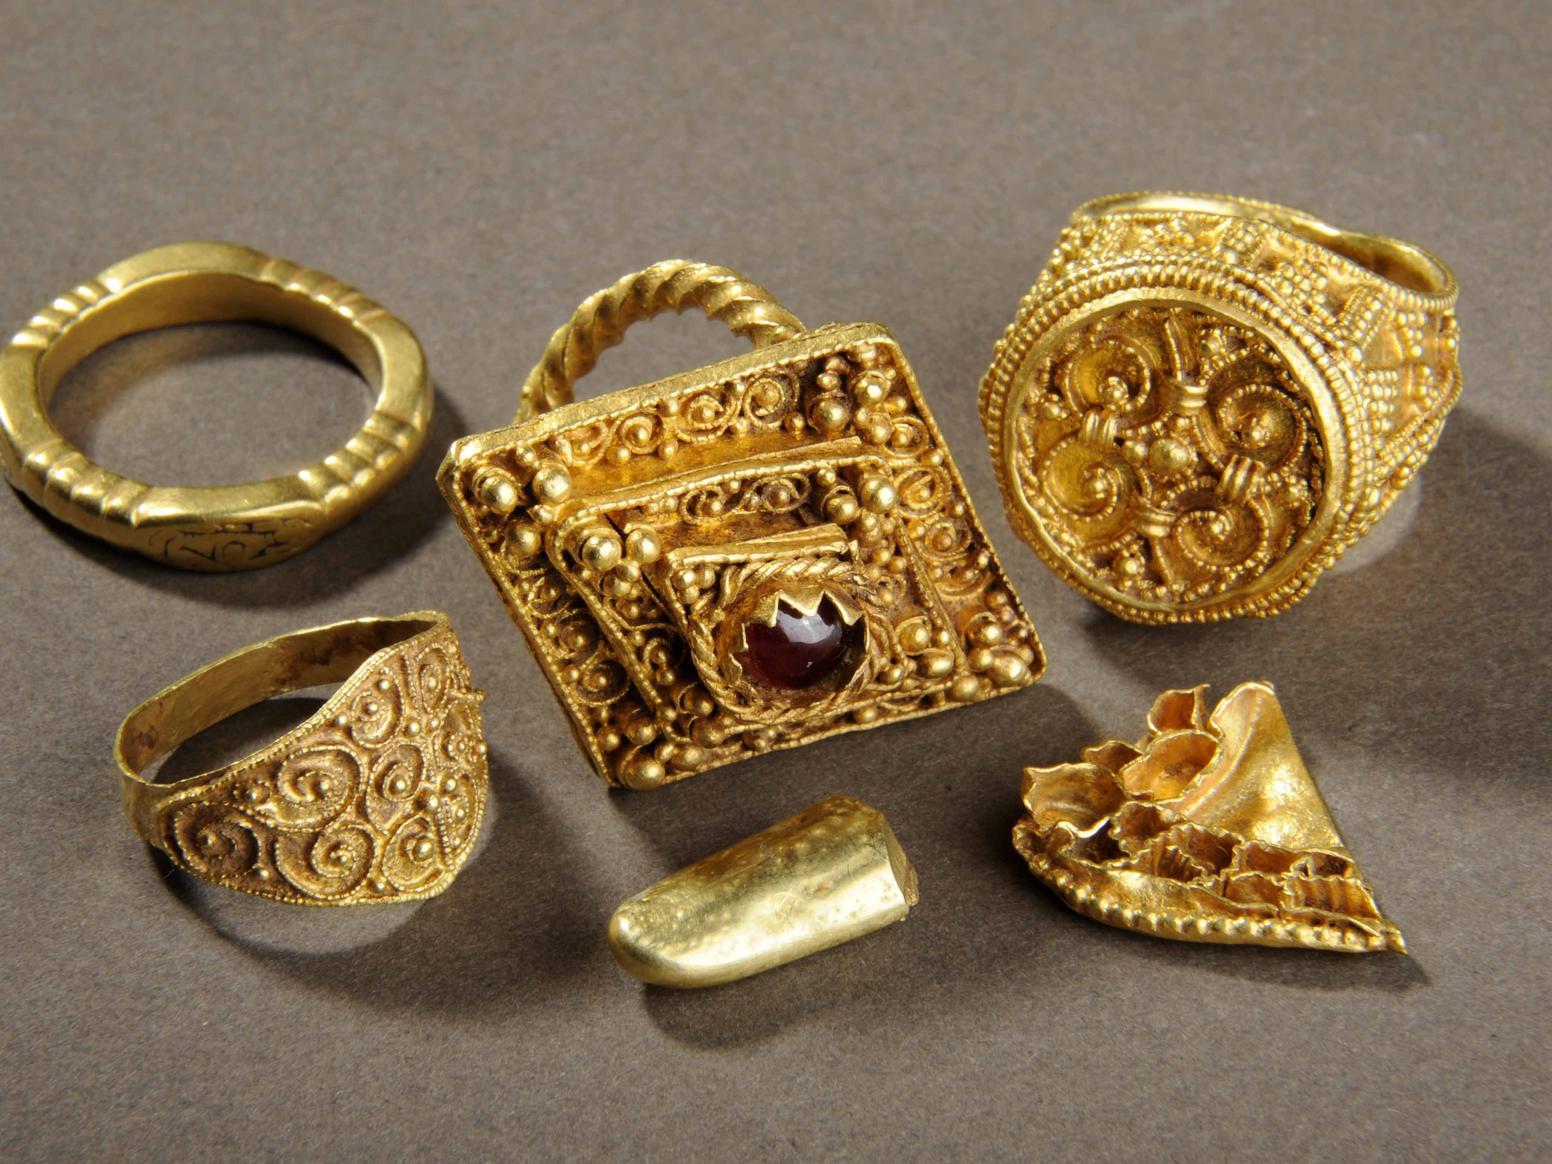 Discovered by a metal detectorist on farmland in Leeds in 2008, the dazzling hoard includes high quality gold jewellery which would only have been worn by people of exceptional wealth and high status in Anglo Saxon society.